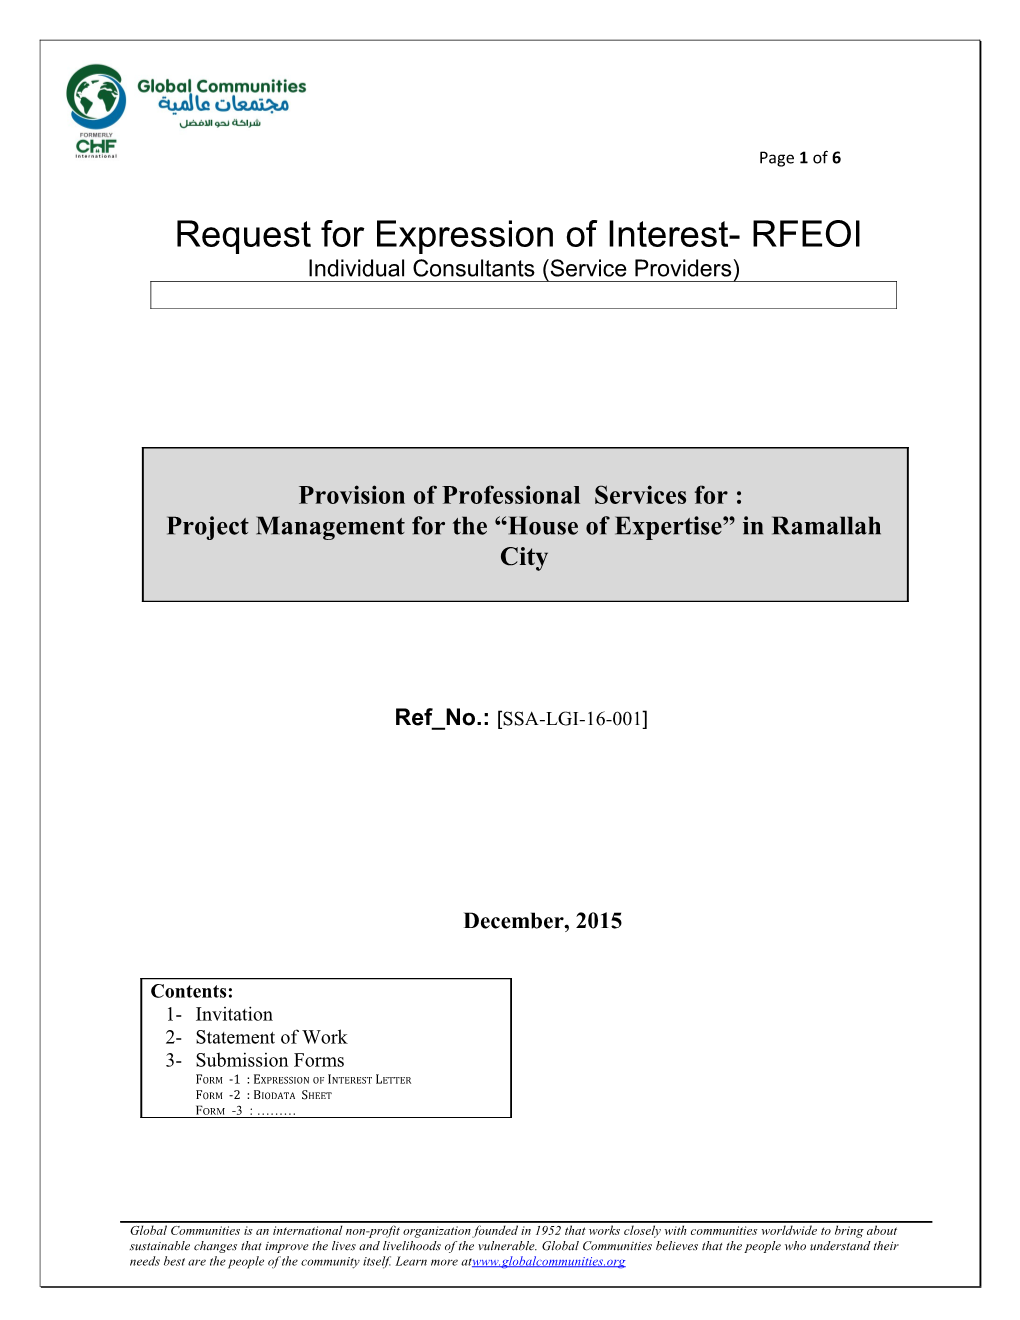 Request for Expression of Interest- RFEOI